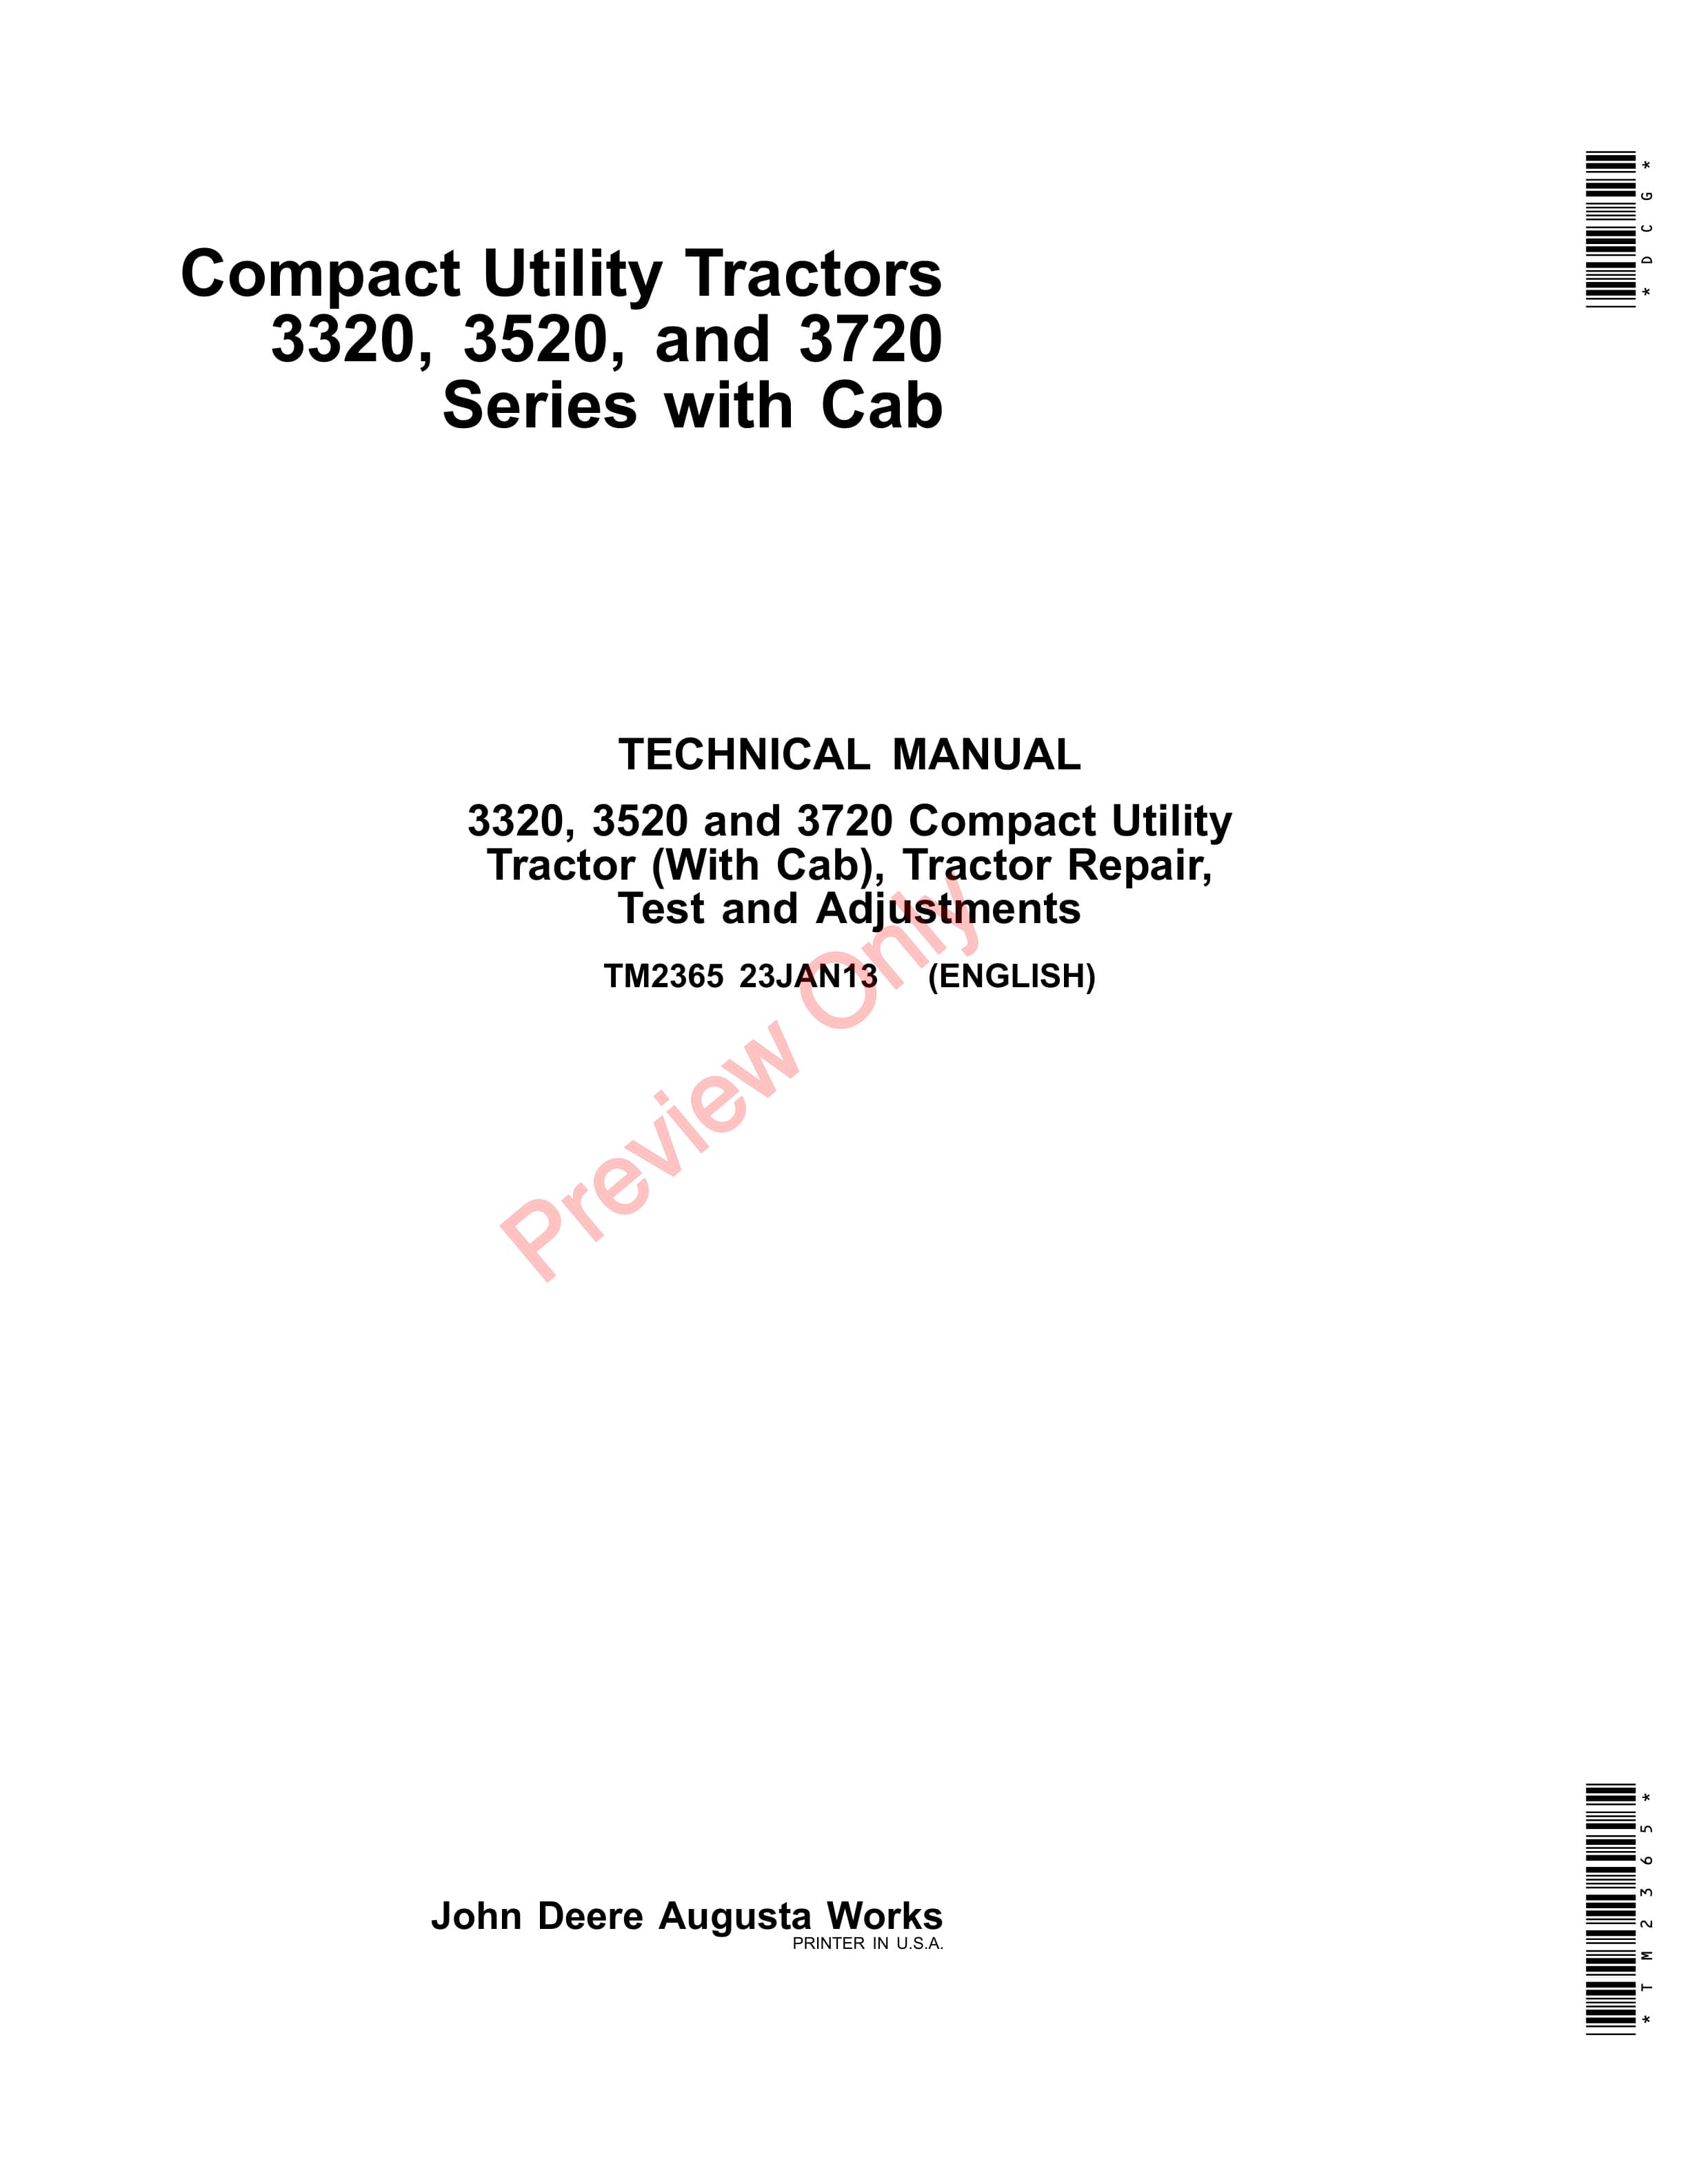 John Deere 3320, 3520 and 3720 Compact Utility Tractors (with Cab) Technical Manual TM2365 23JAN13 PDF